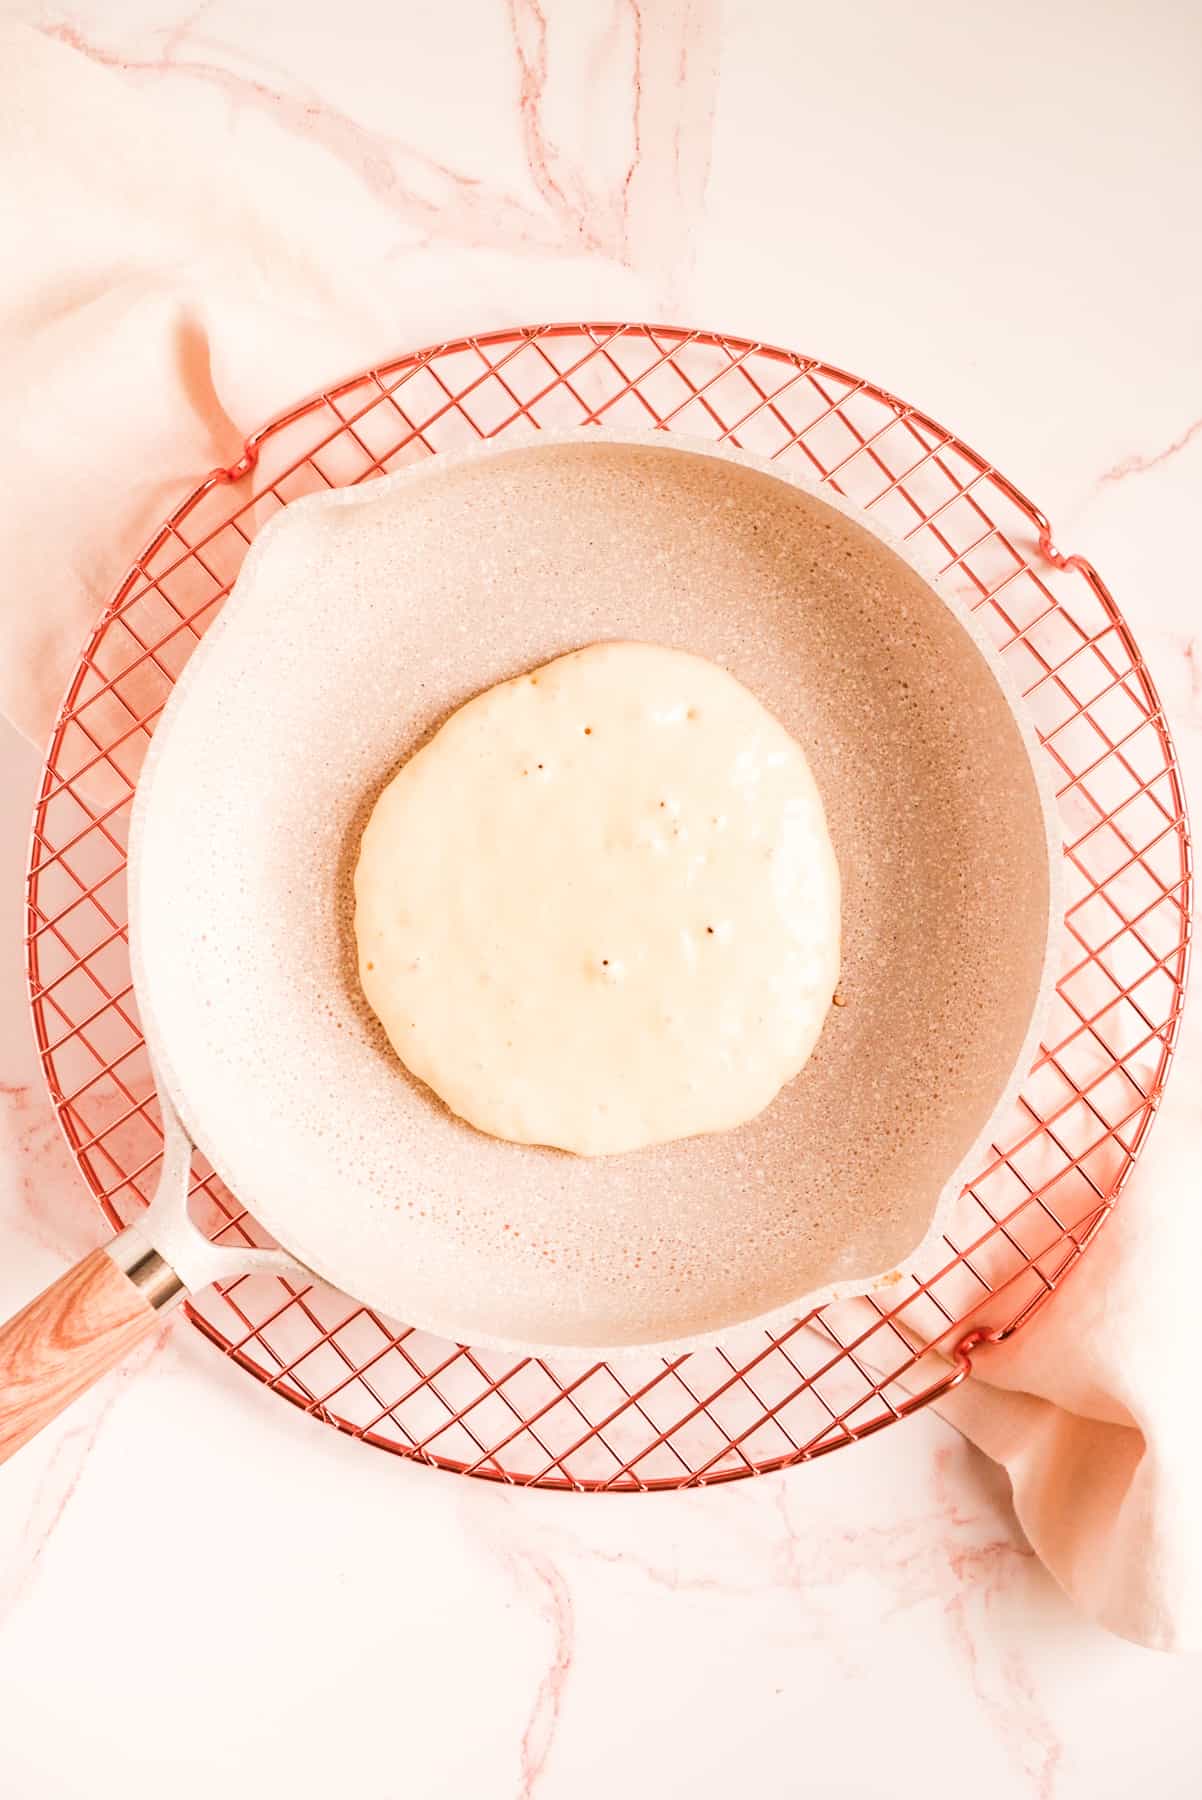 buttermilk pancake batter cooking in a pan on a wire rack